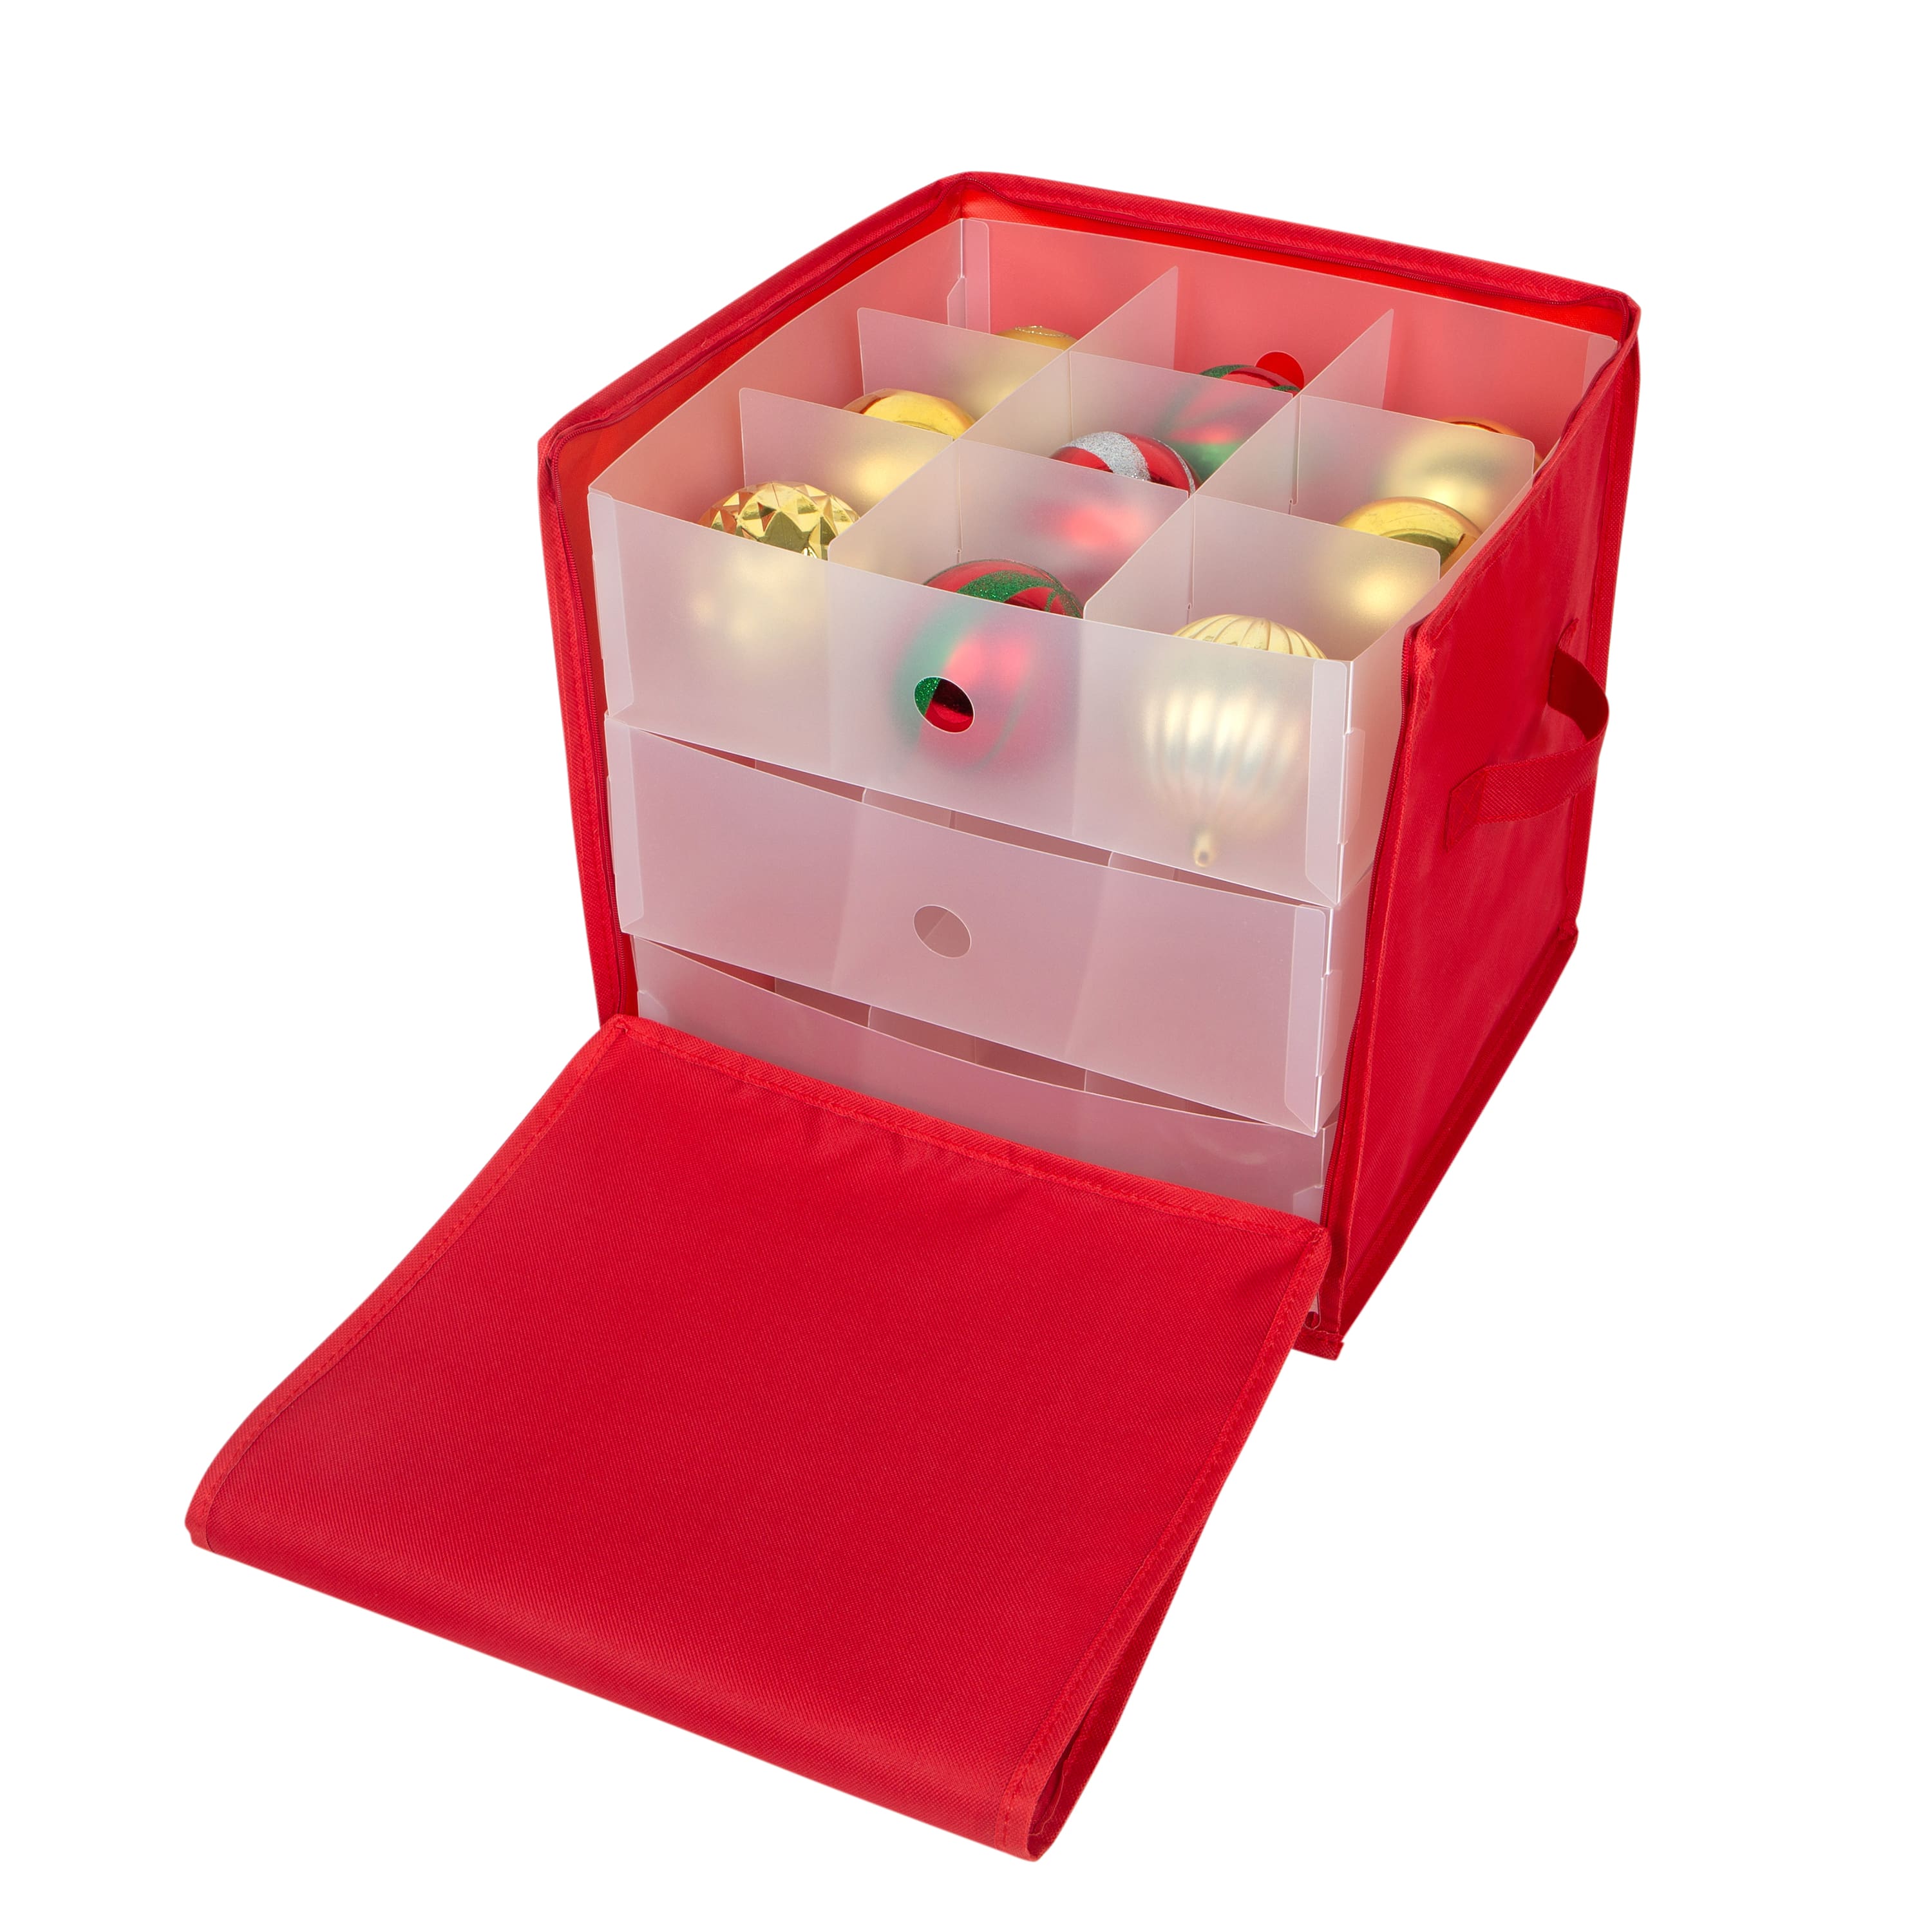 Simplify Stackable Christmas Ornament Storage Box